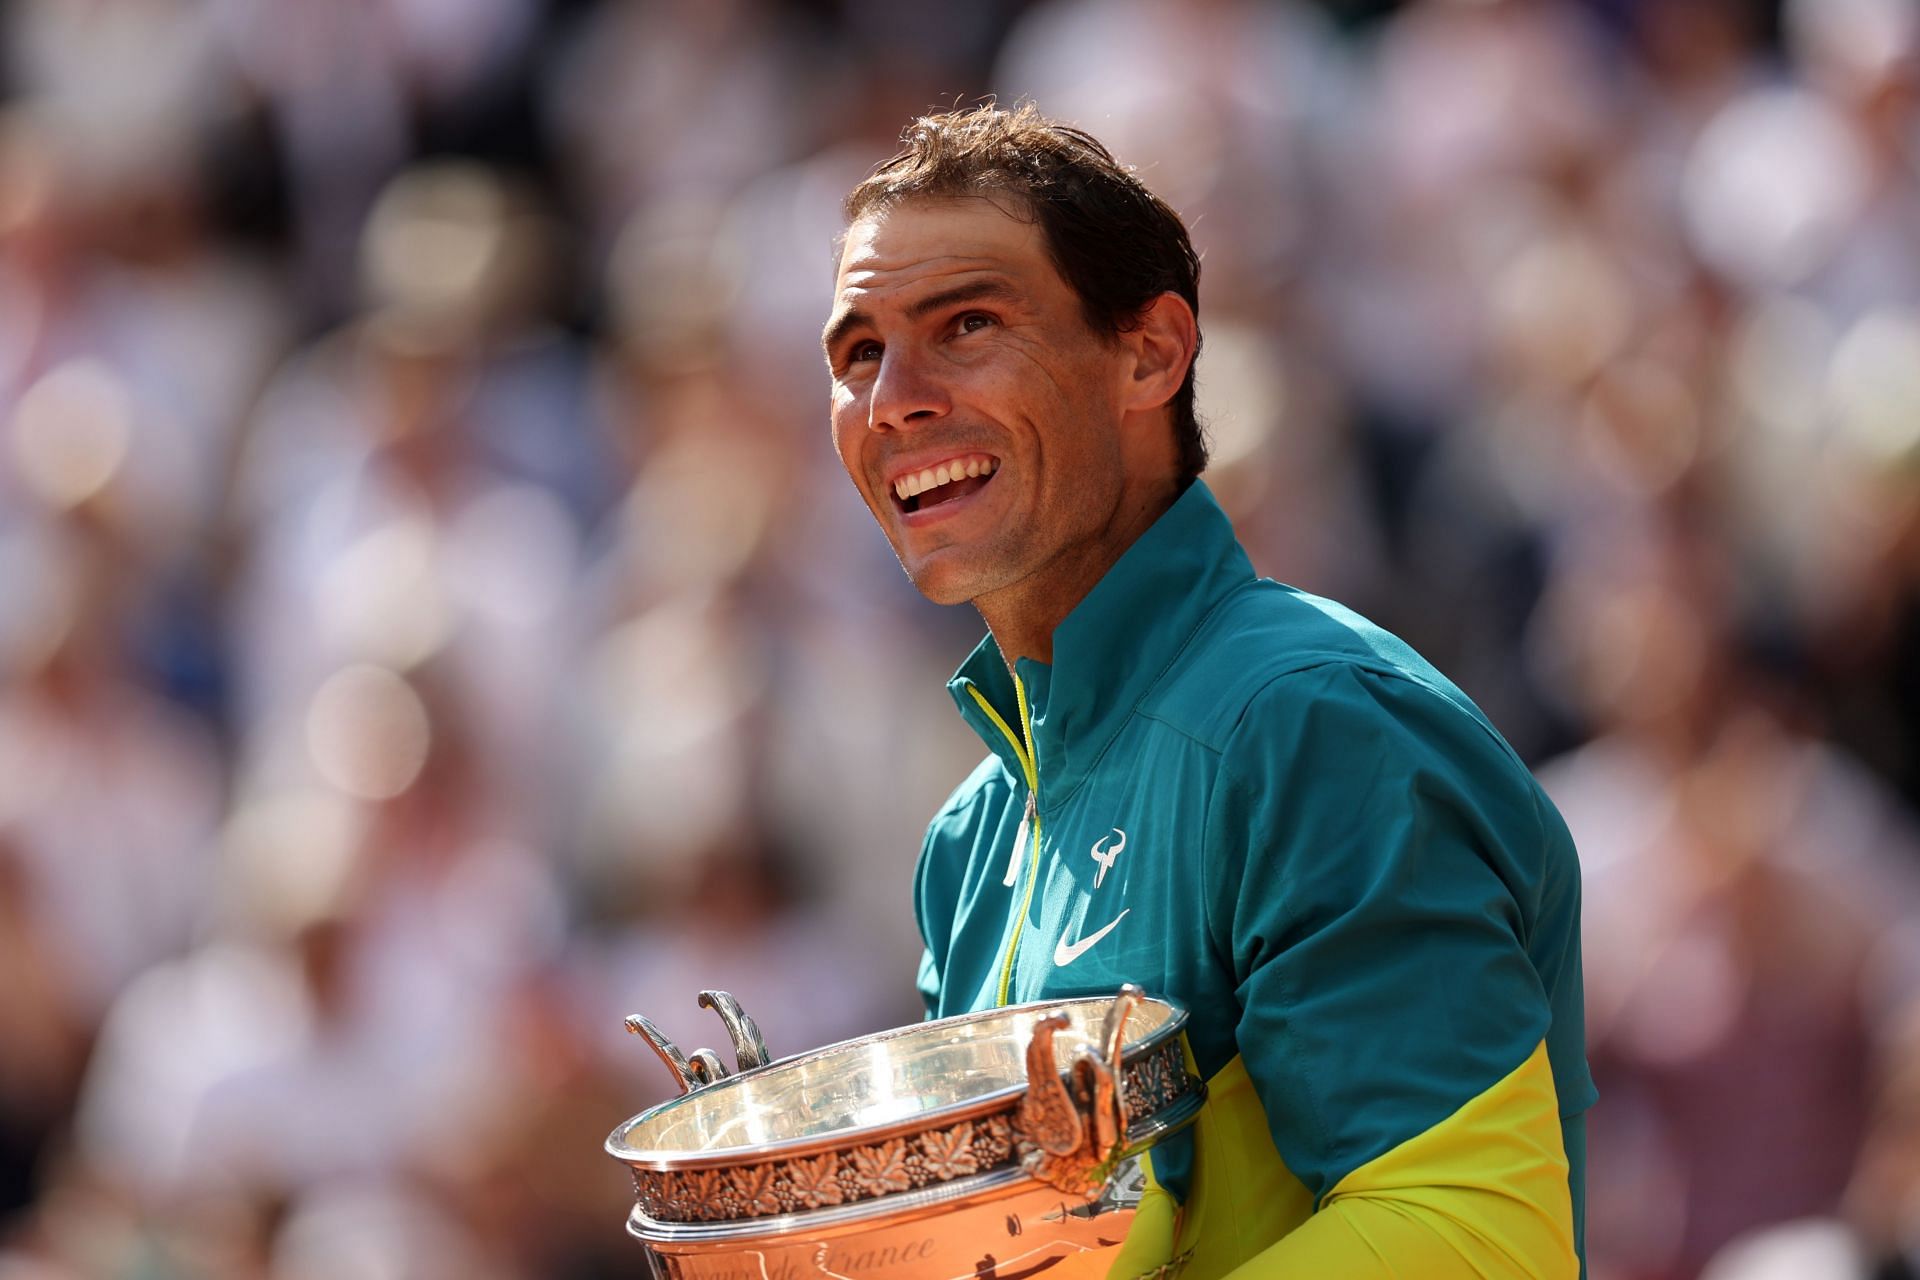 Rafael Nadal will be seeded second at the 2022 Wimbledon Championships